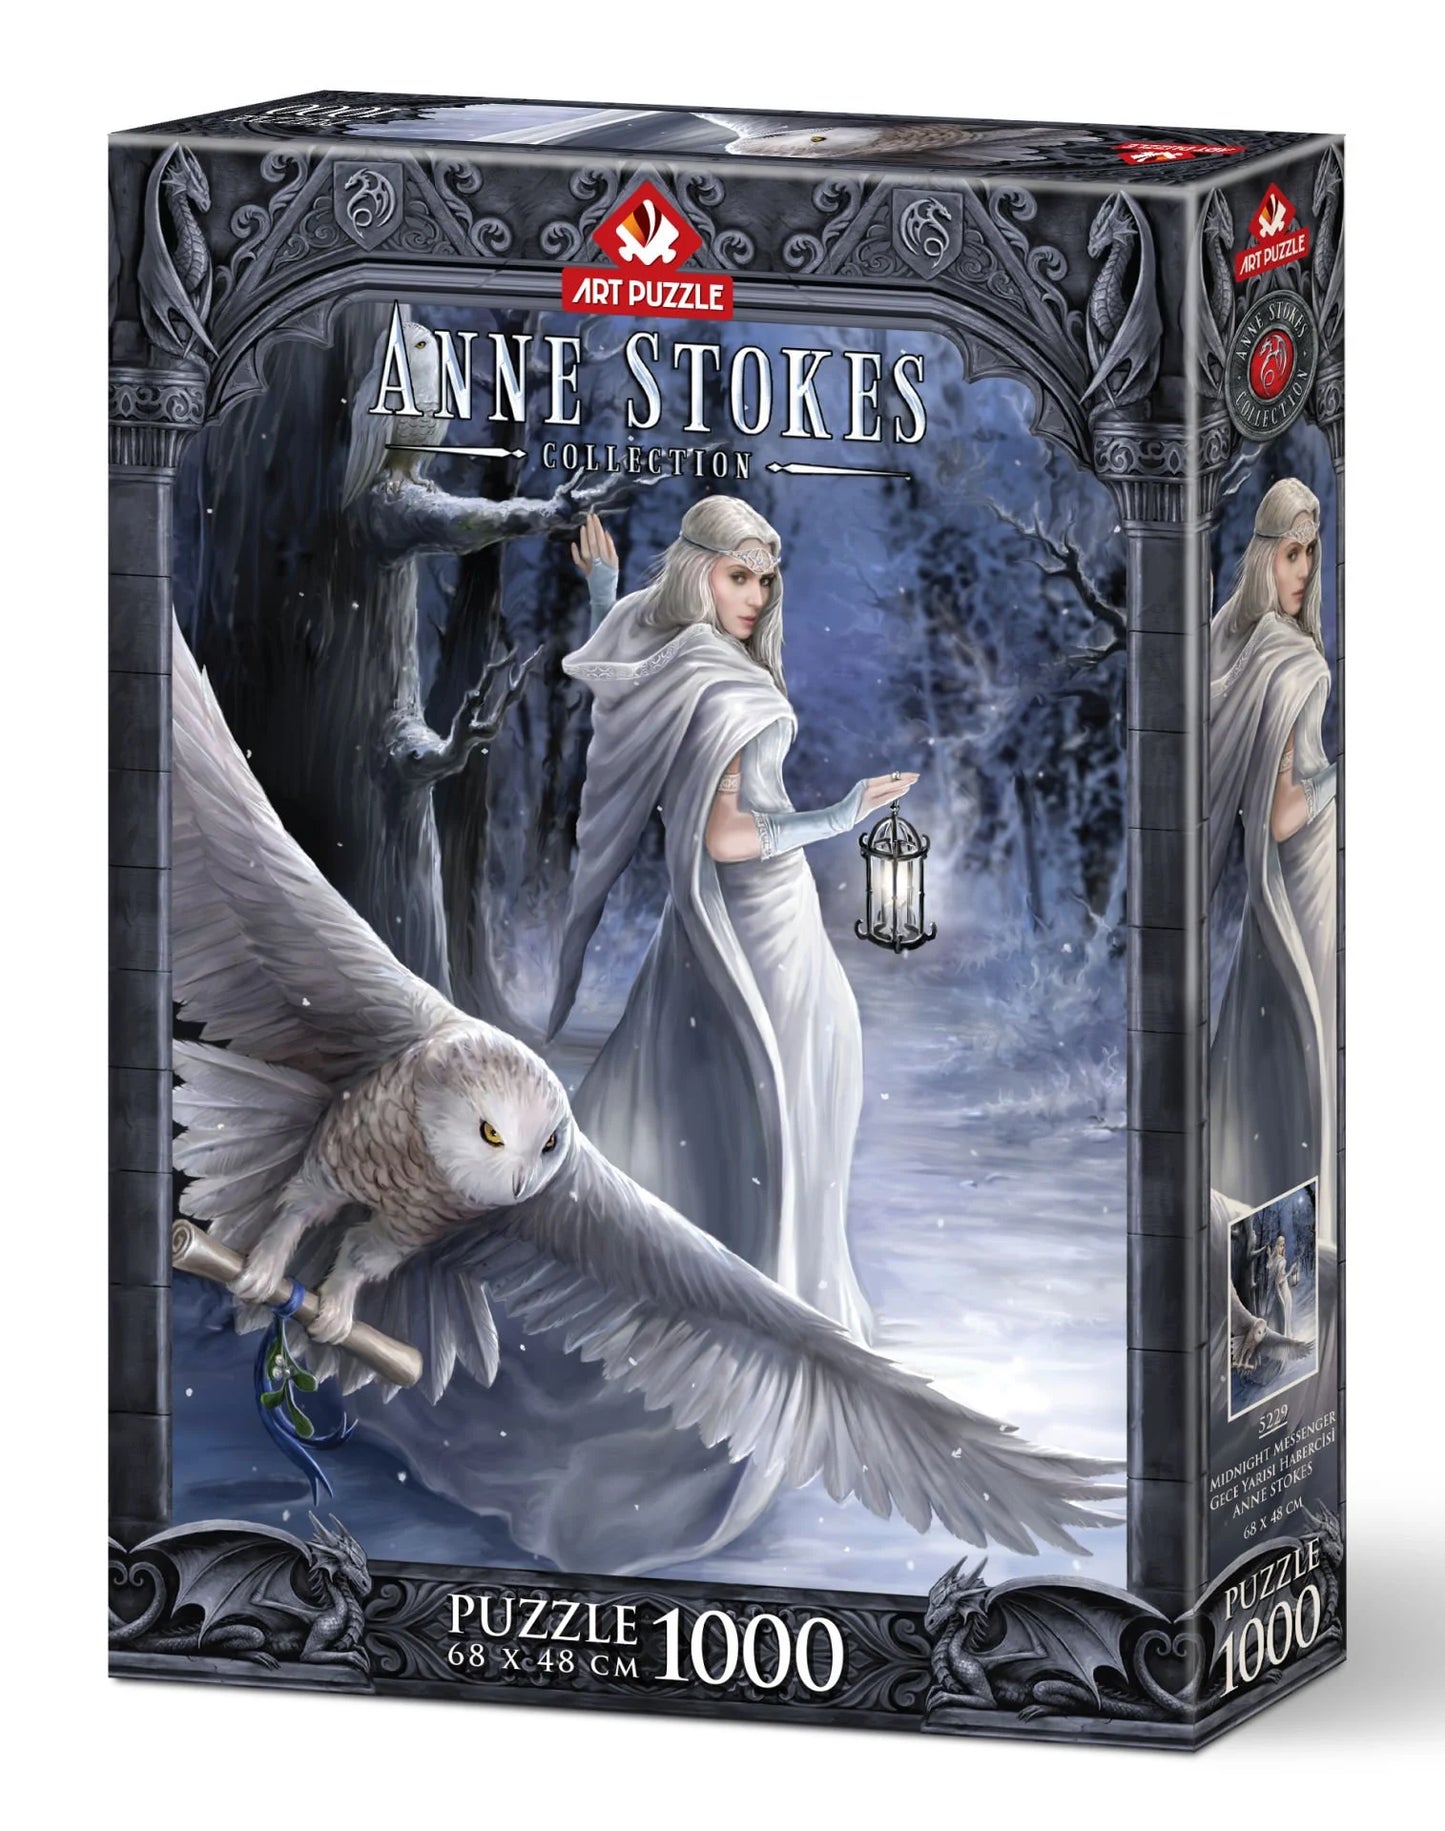 Midnight Messenger by Anne Stokes, 1000 Piece Puzzle